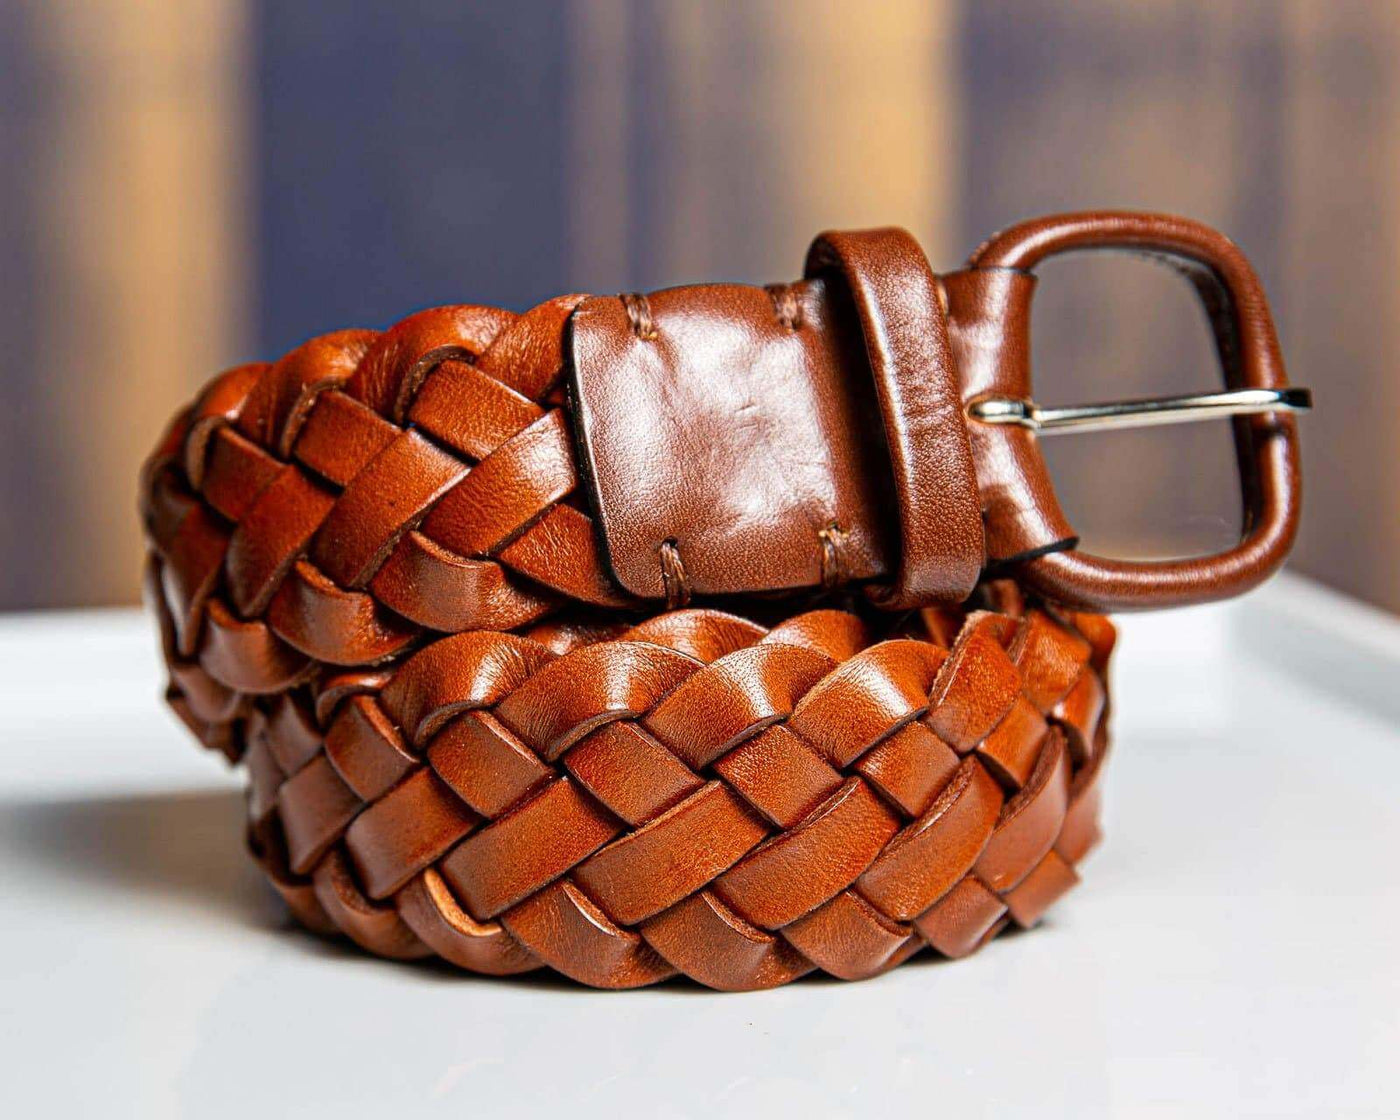 Braided Woven Vintage Brown Leather Belt Sz 34 - Accessories